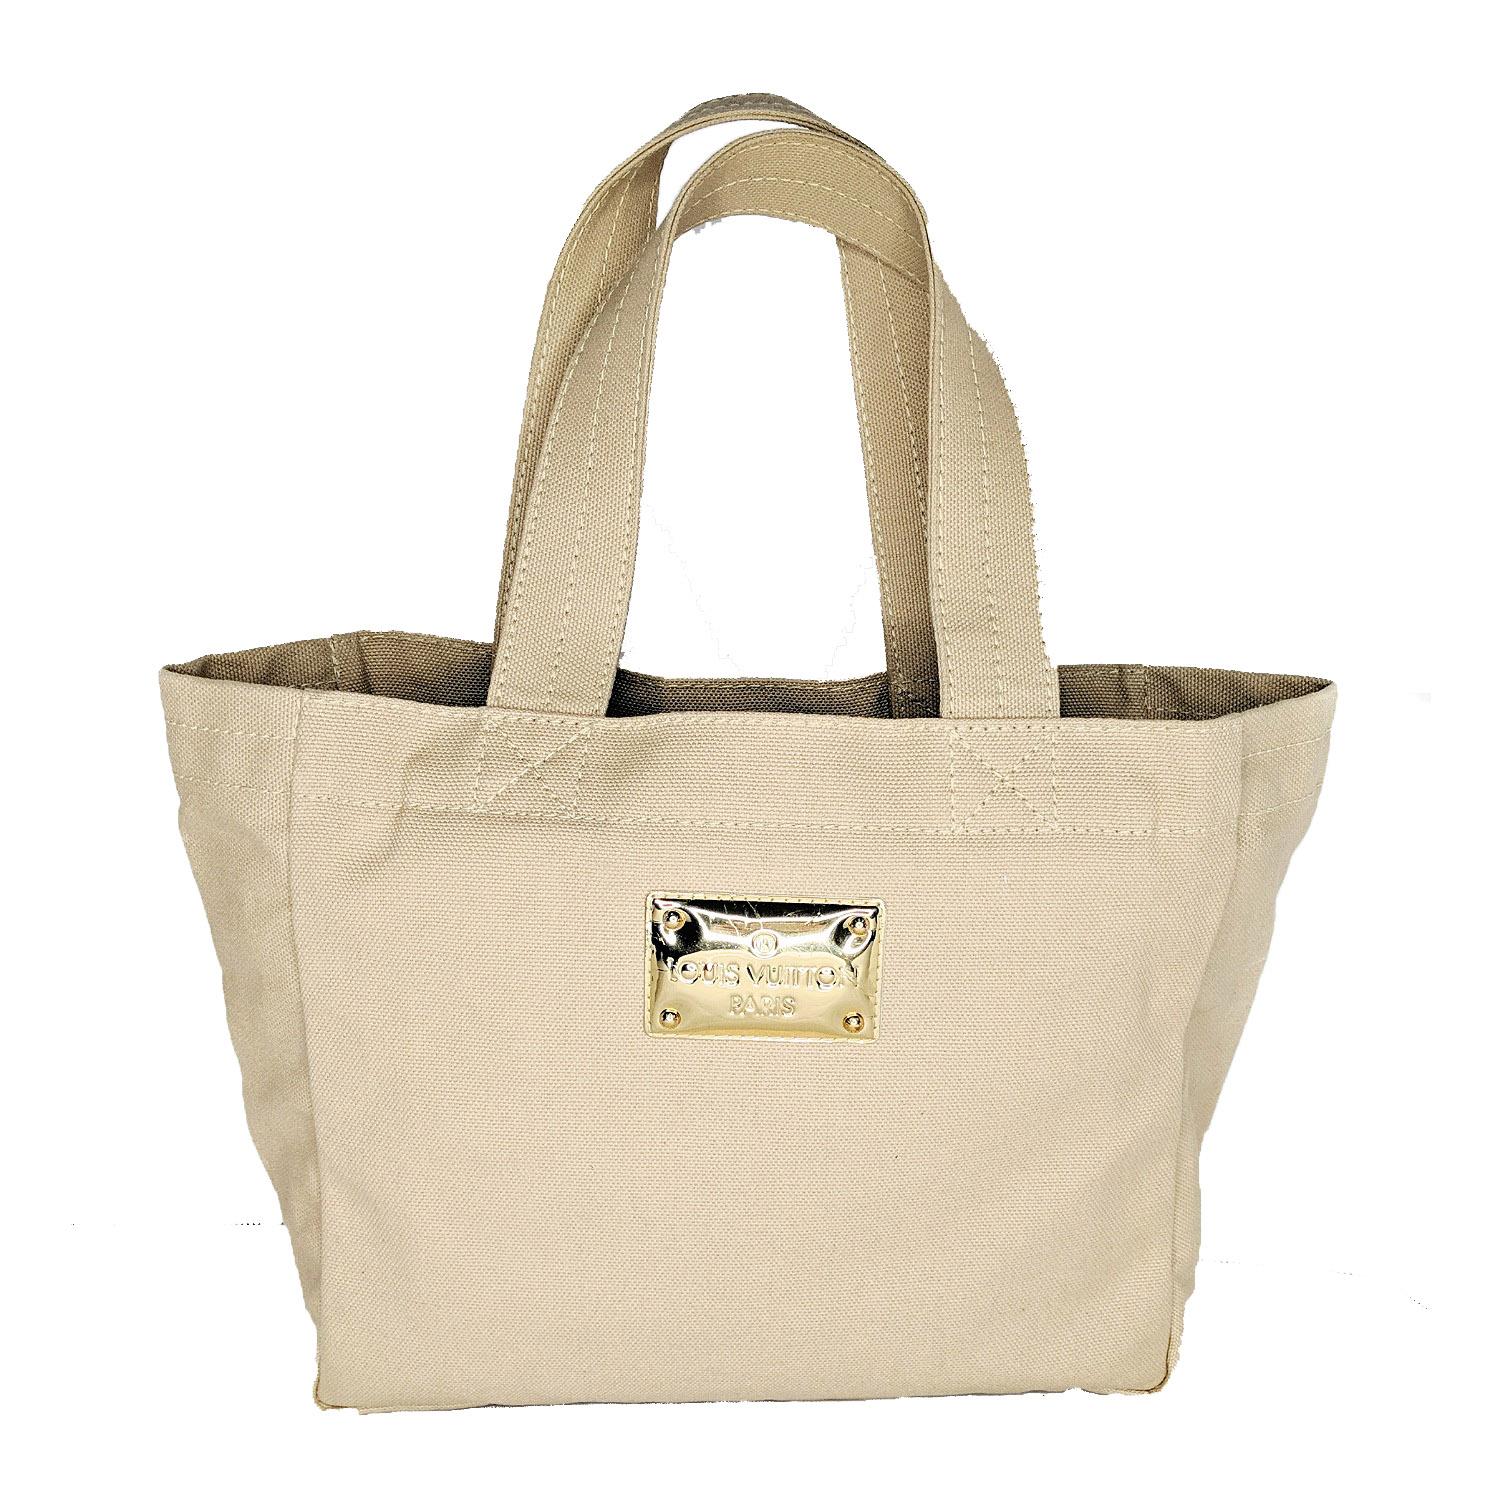 This unique Louis Vuitton Limited Edition Light Beige Canvas That's Love 2 Miroir tote features lightweight durable canvas construction for easy carrying when traveling or daily use. The signature Louis Vuitton Miroir lettering details on the front